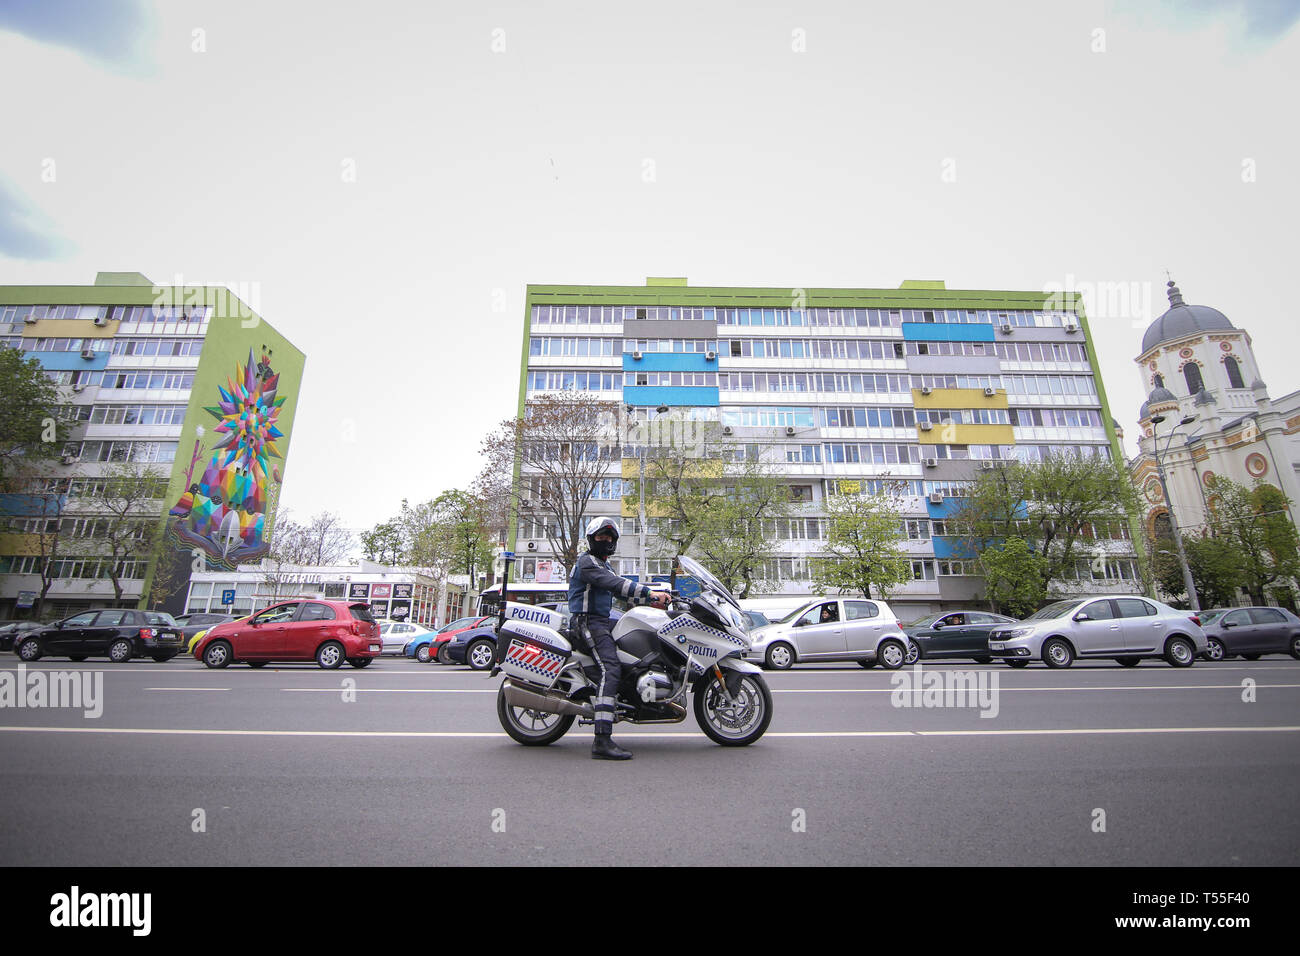 Bucharest, Romania - April 21, 2019: Police officer riding a BMW motorcycle in the Bucharest city traffic Stock Photo